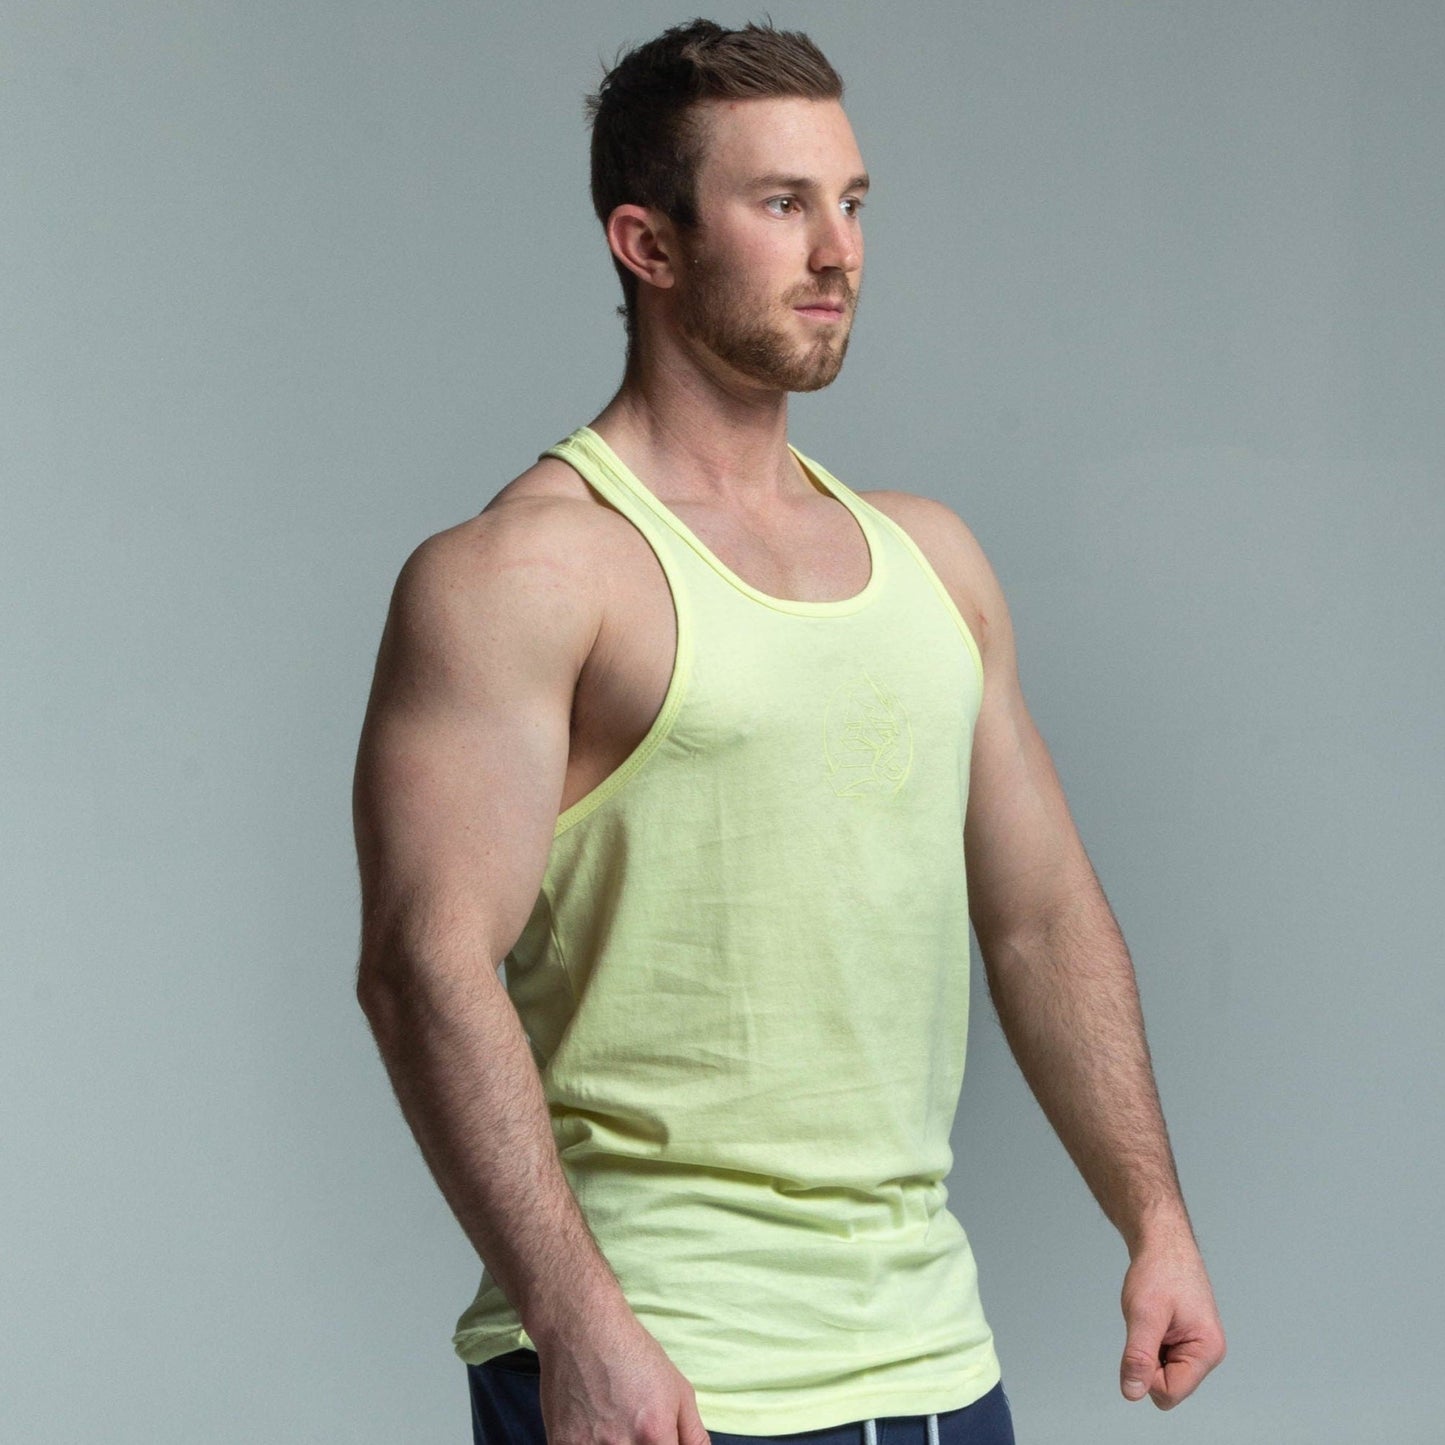 Angled view of muscular man wearing yellow glow stringer